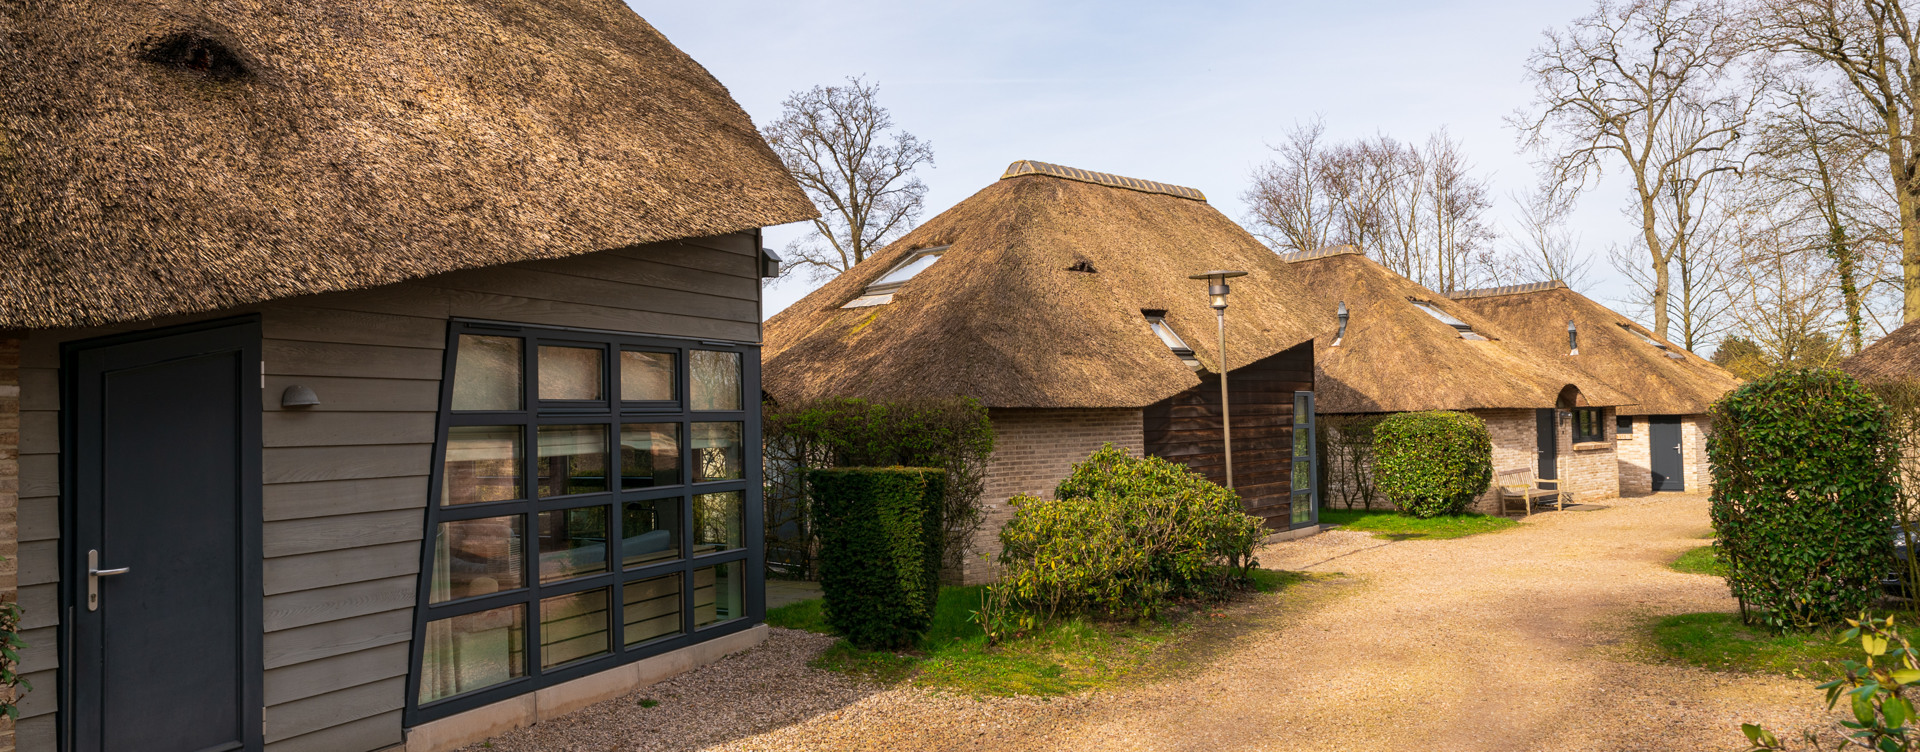 Book a stay near the most impressive
dunes in the Netherlands